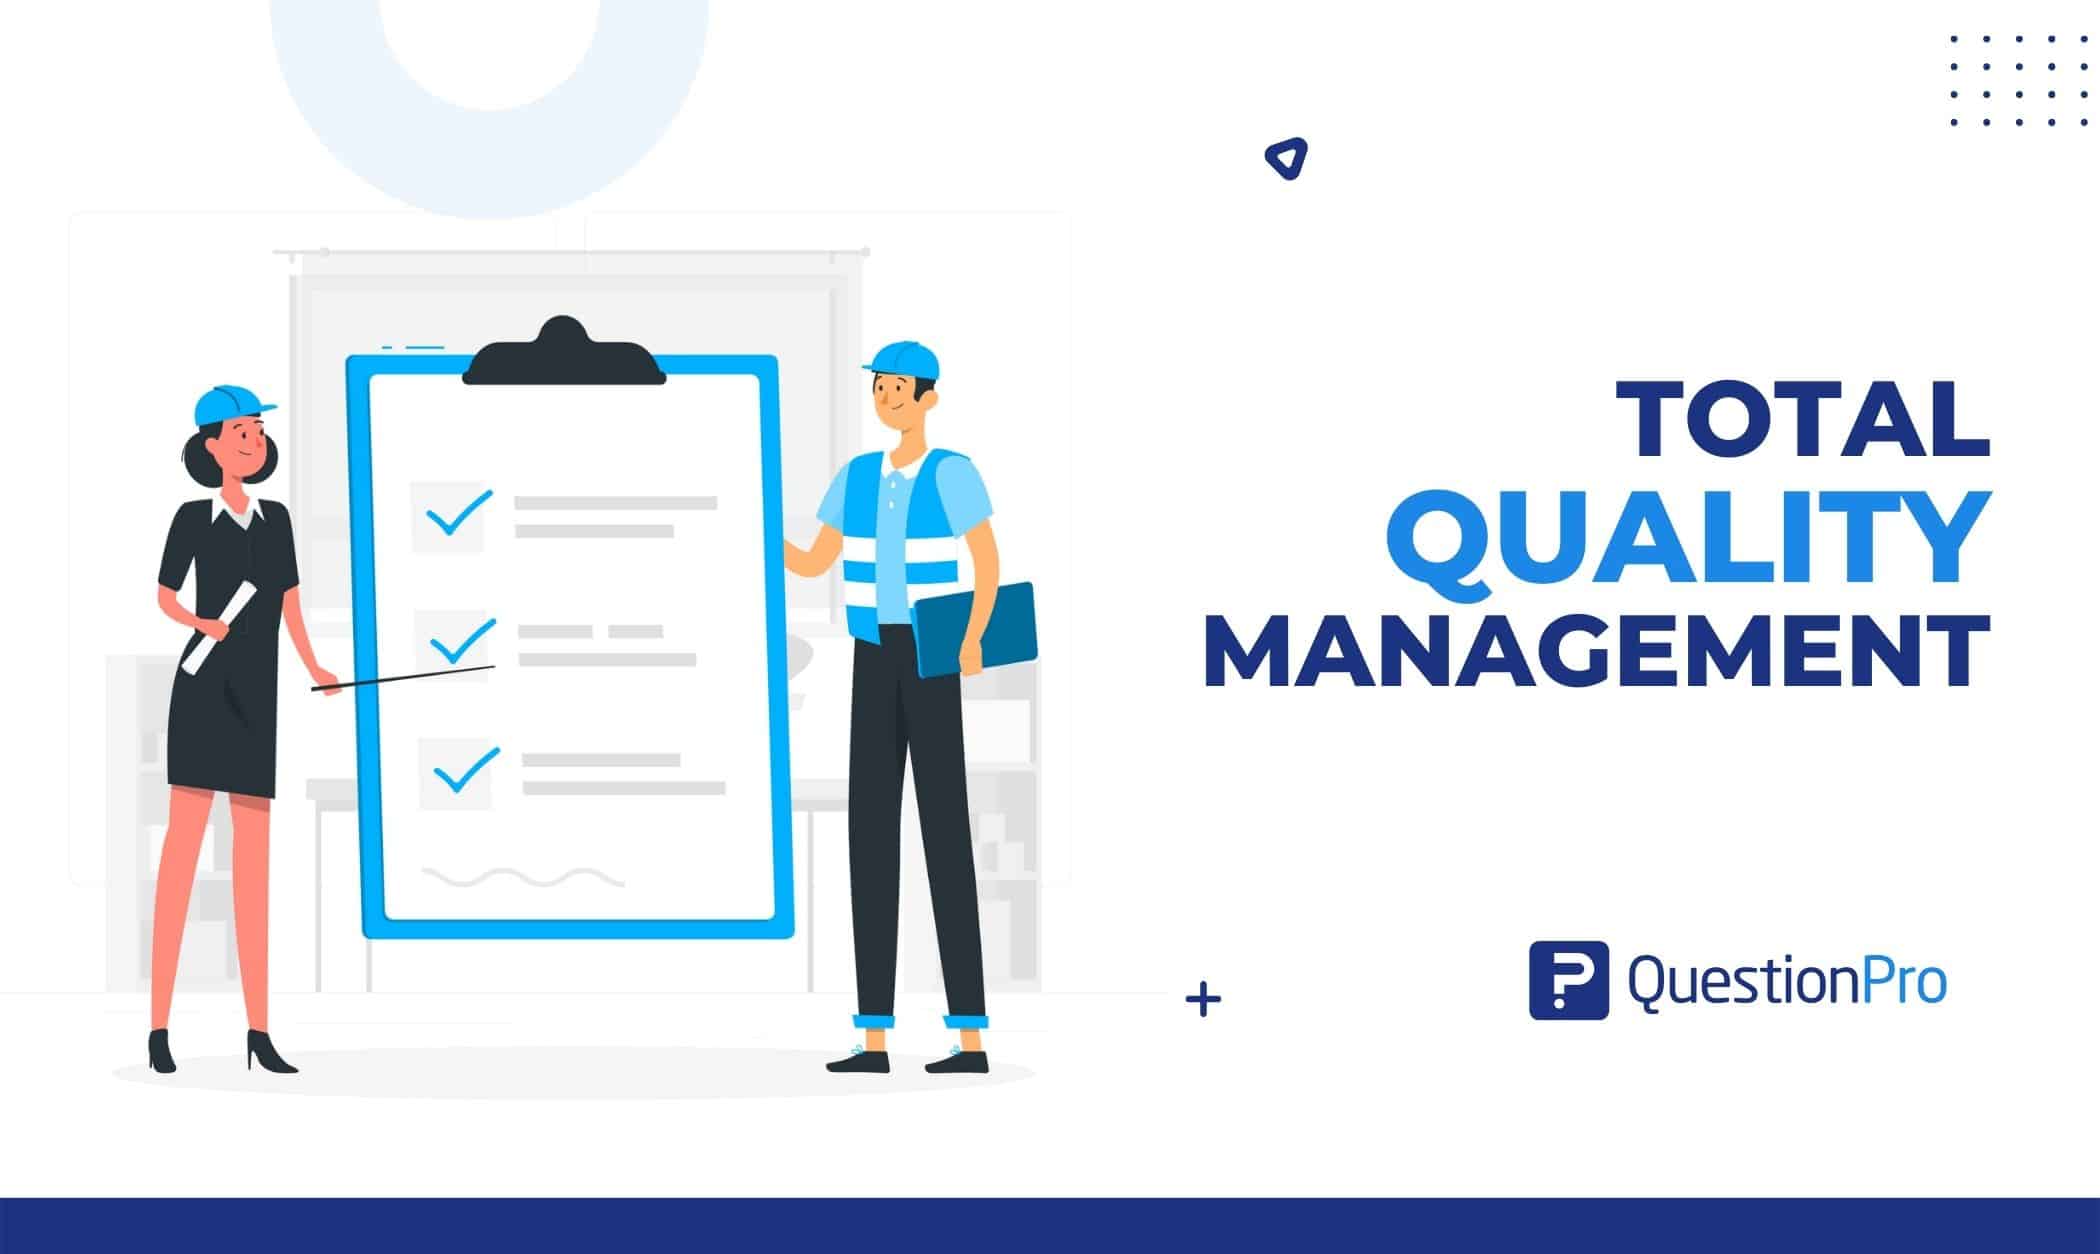 Total Quality Management: What it is, Principles & Examples